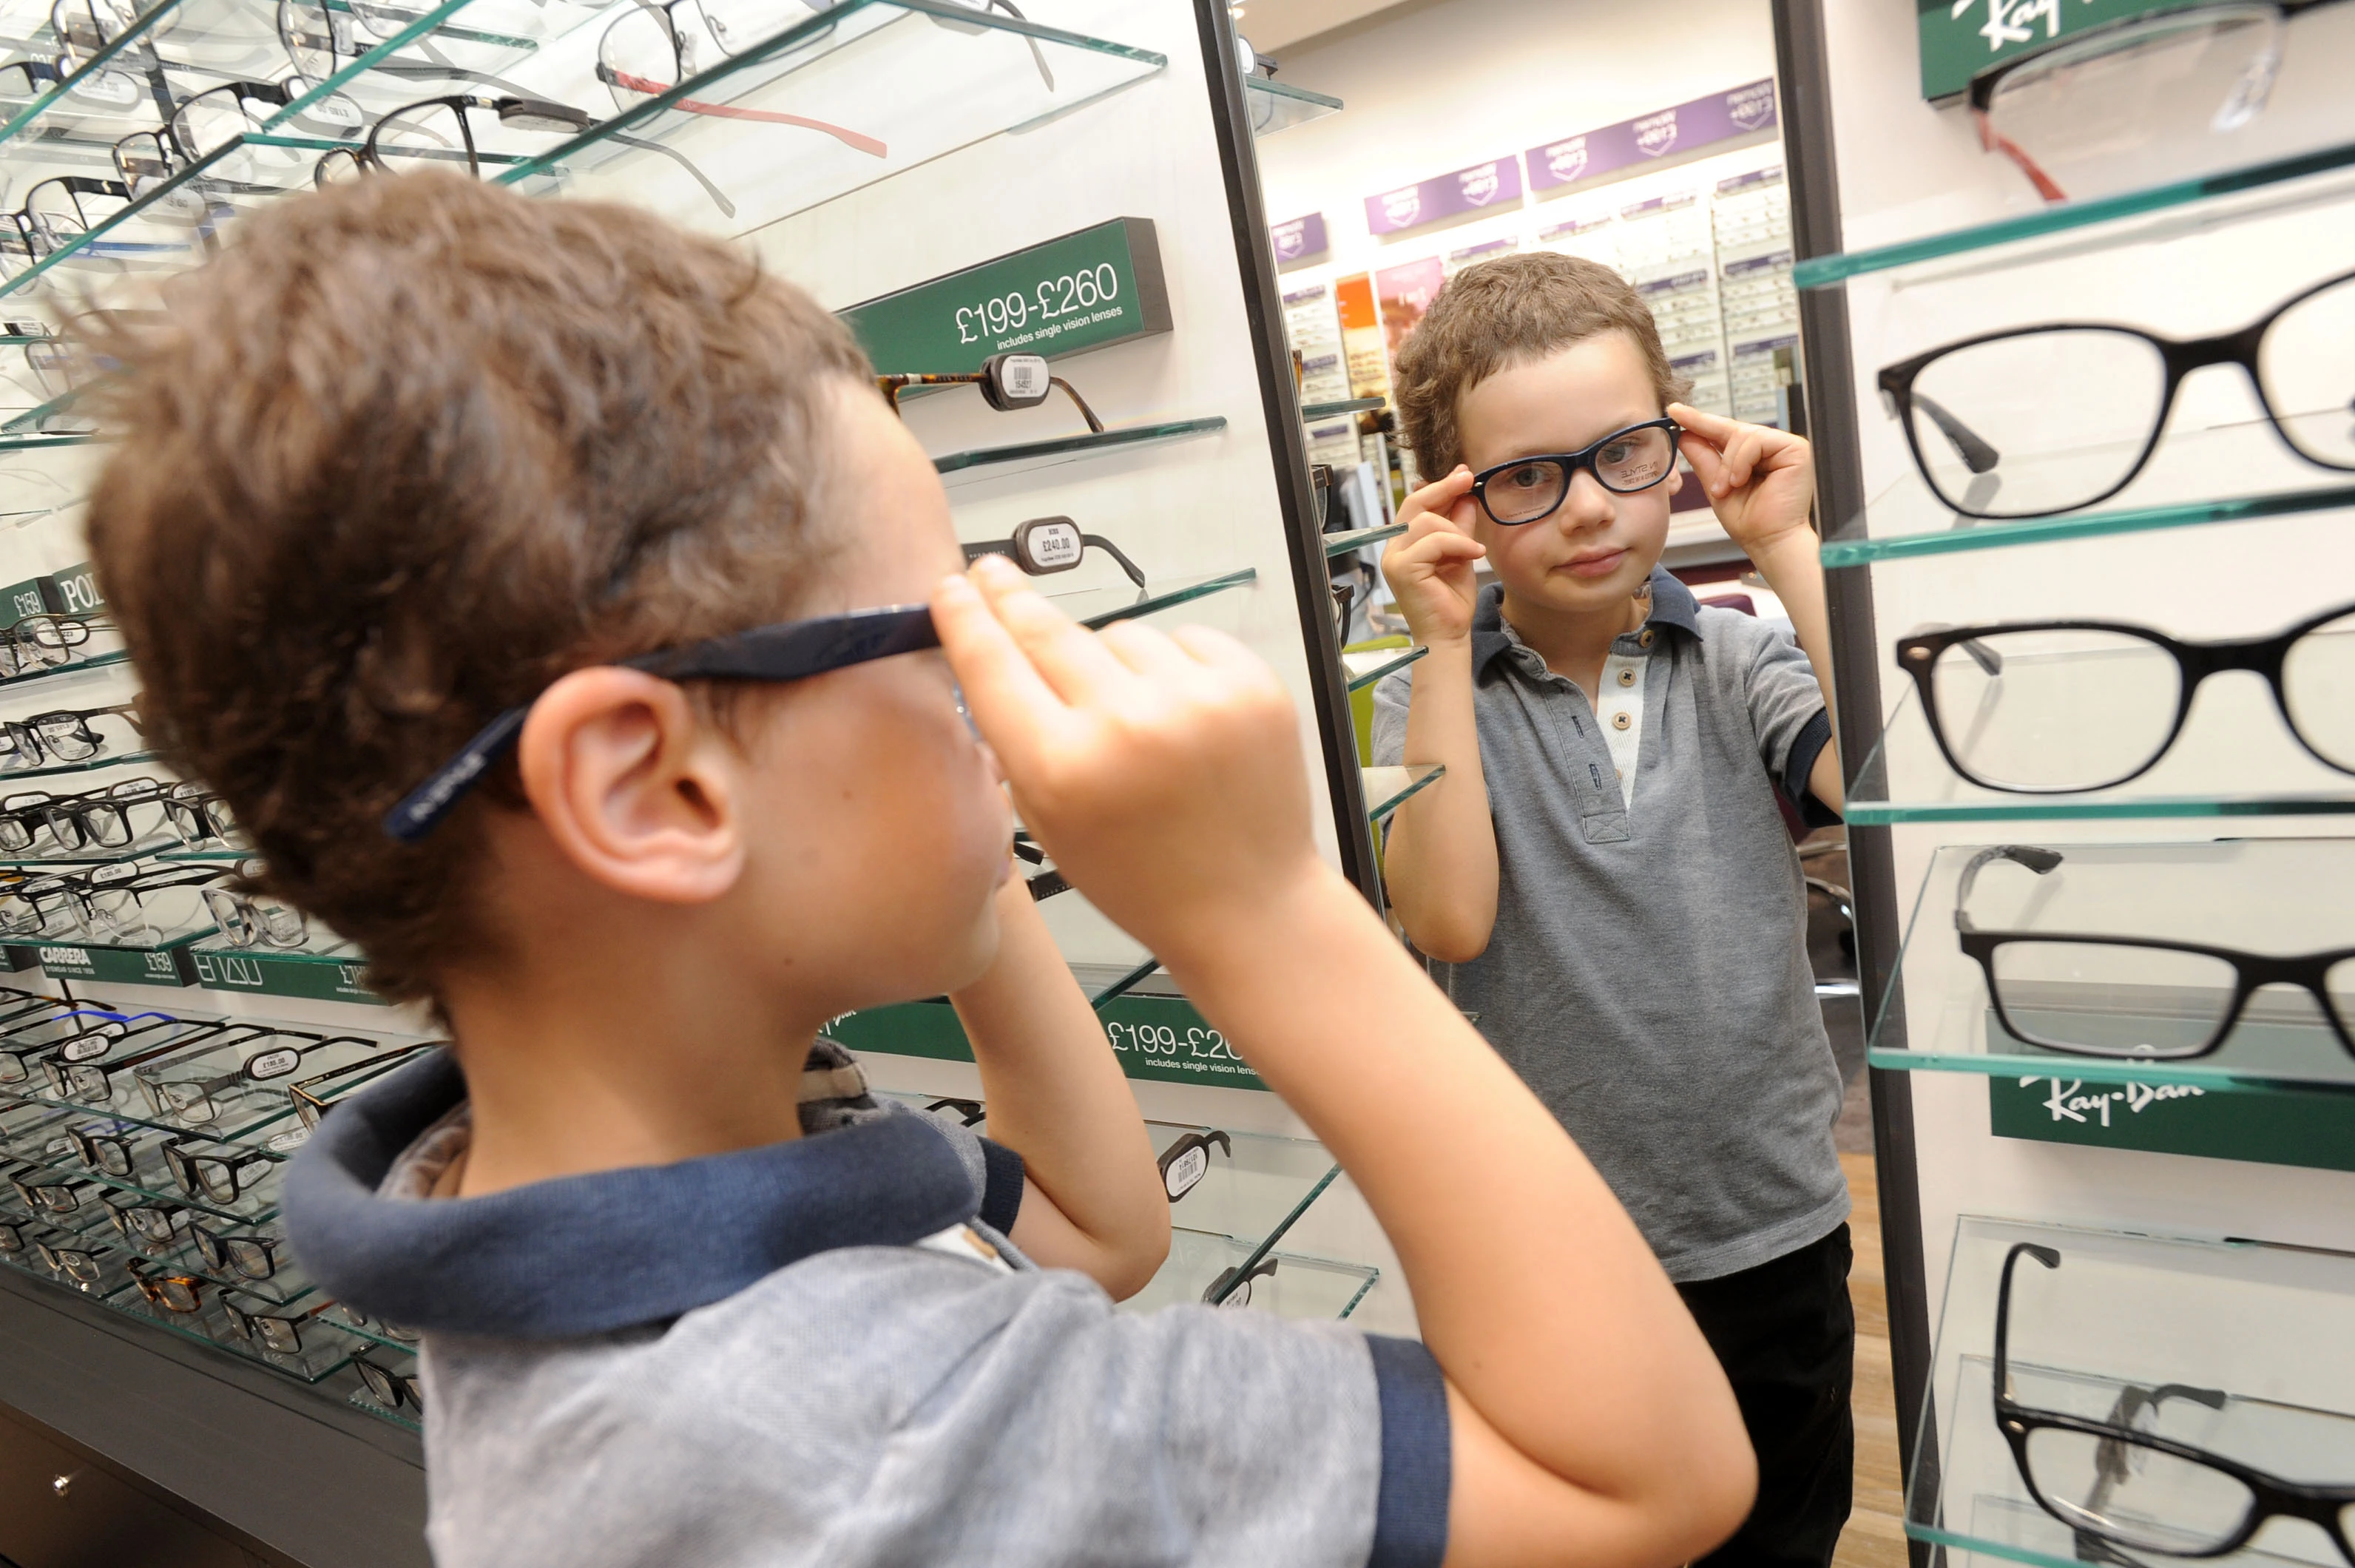 Antonio Constantine tries on frames at Vision Express Kingston